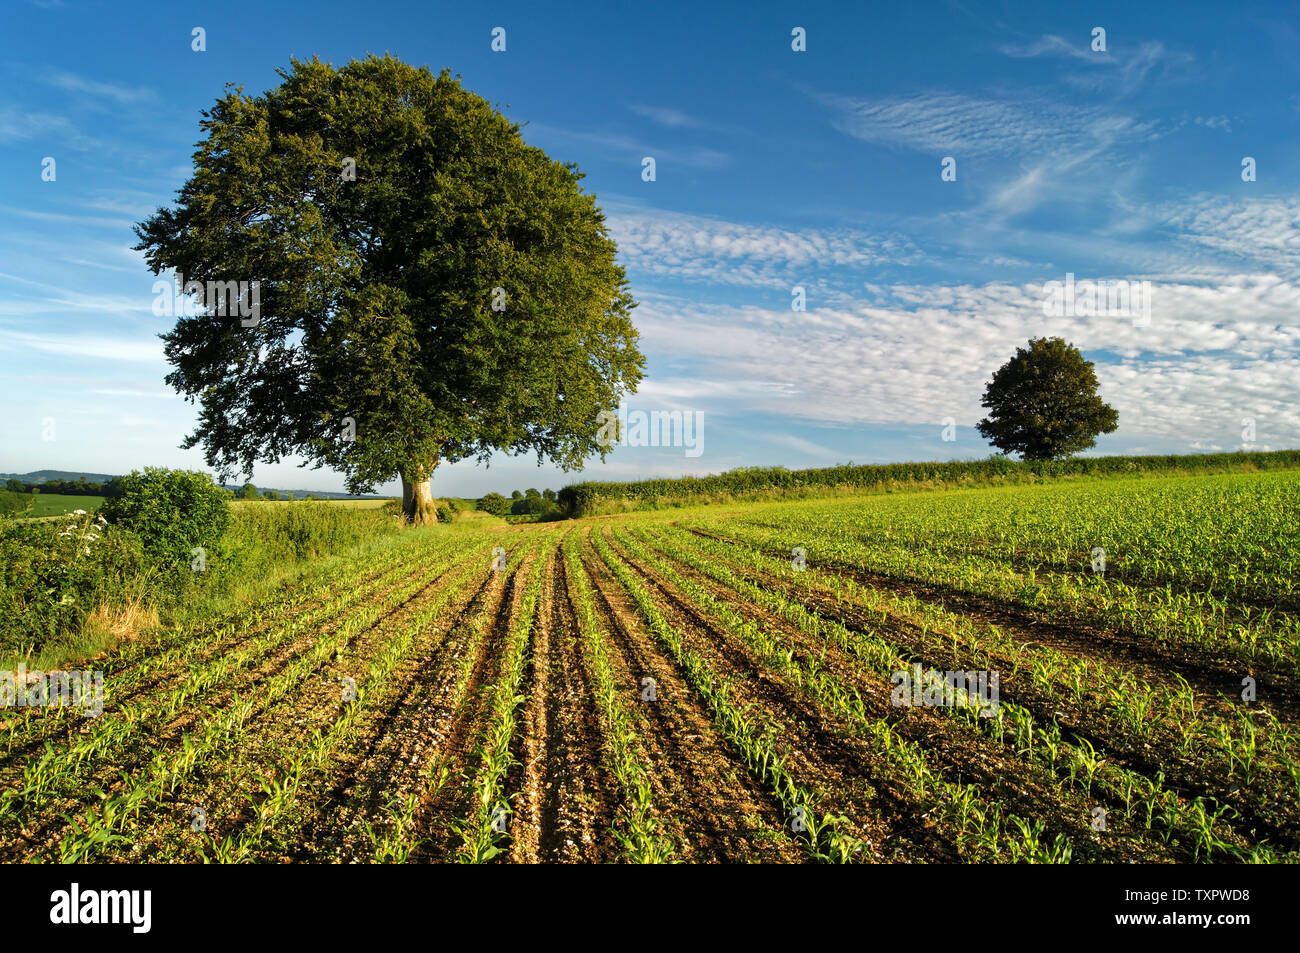 UK,Somerset,Chard,Snowdon Hill,Ploughed Field,Young Crops & Beech Trees Stock Photo